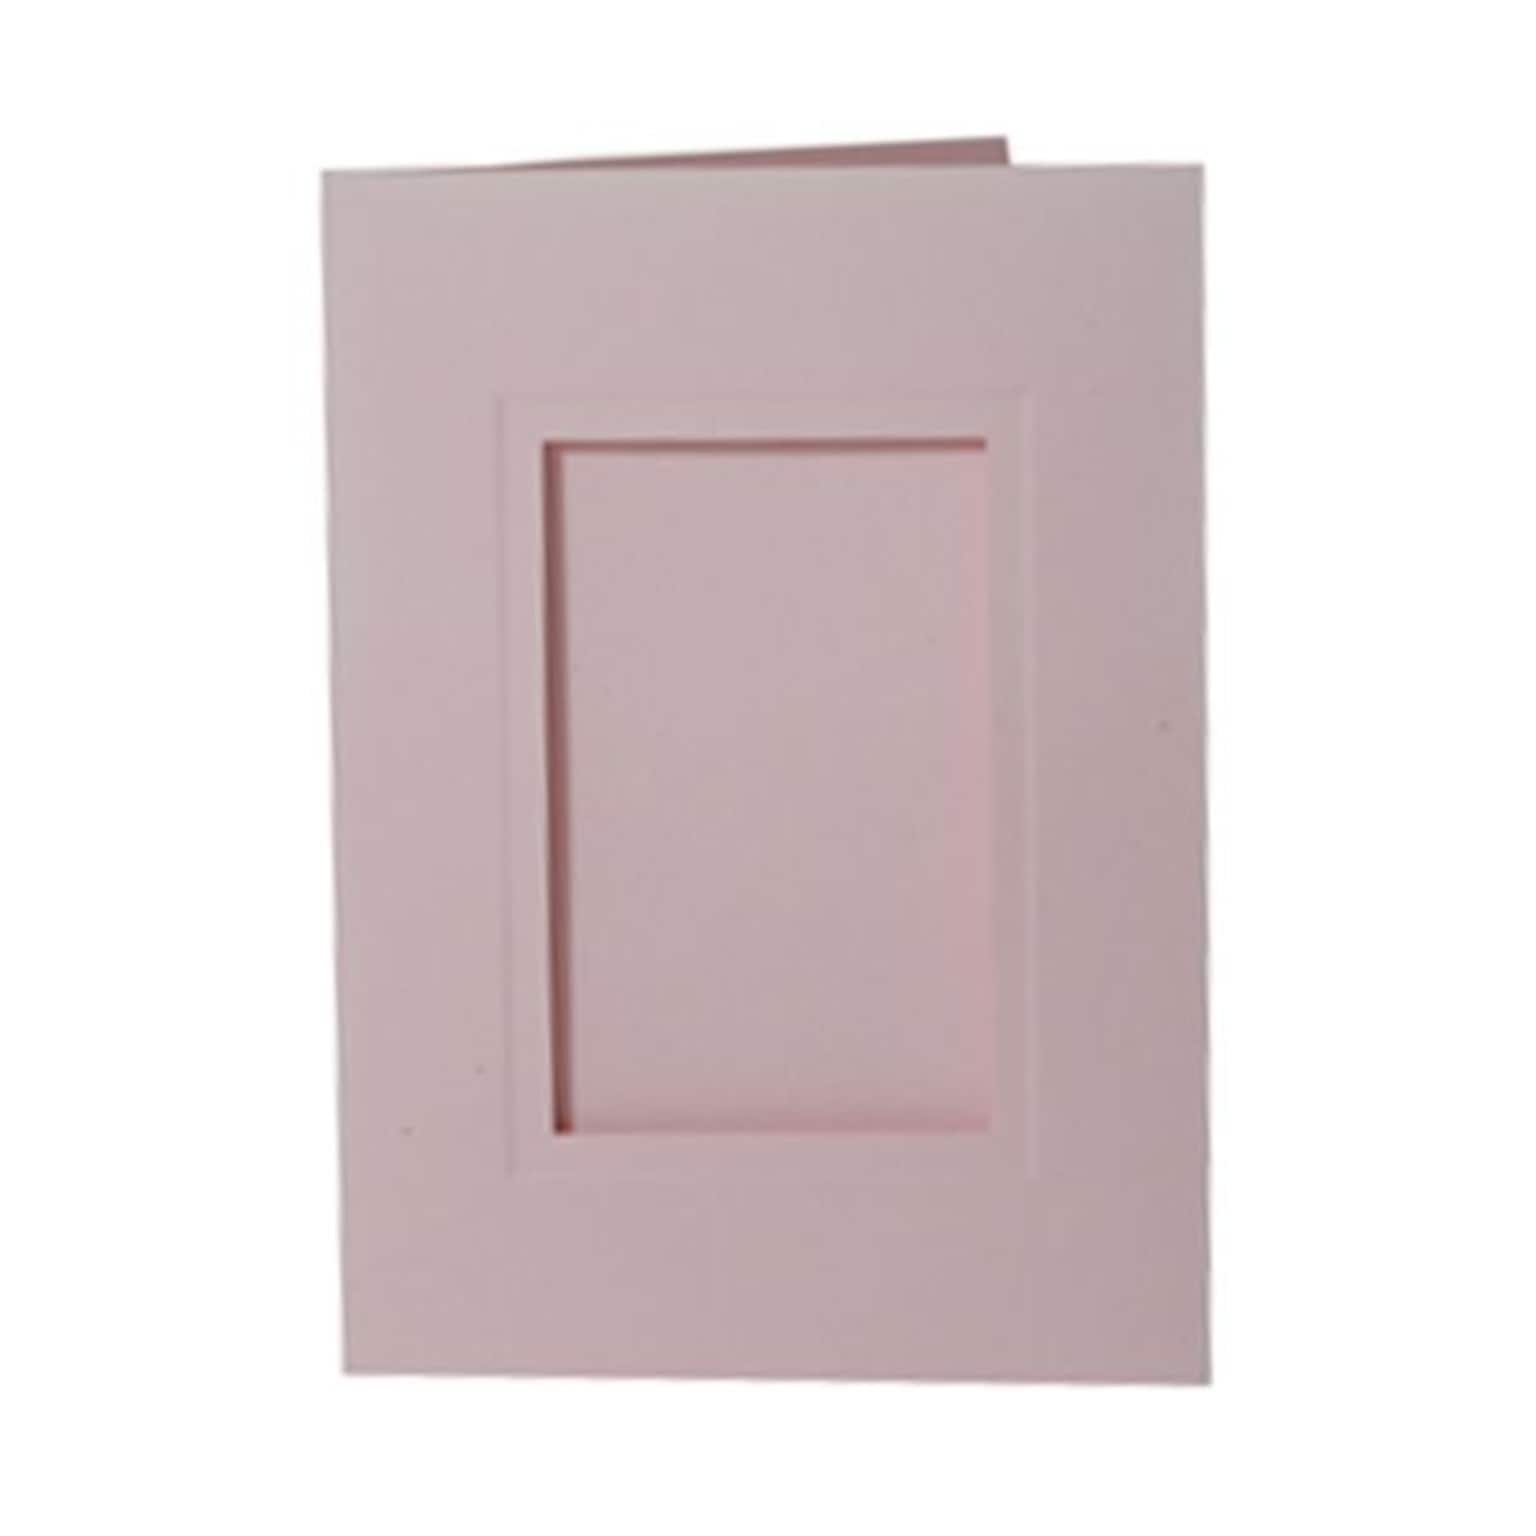 JAM Paper® Foldover Photo Cards, A7 size, 5 x 7, 2.5 x 4 Opening, Baby Pink 100/pack (1791031B)